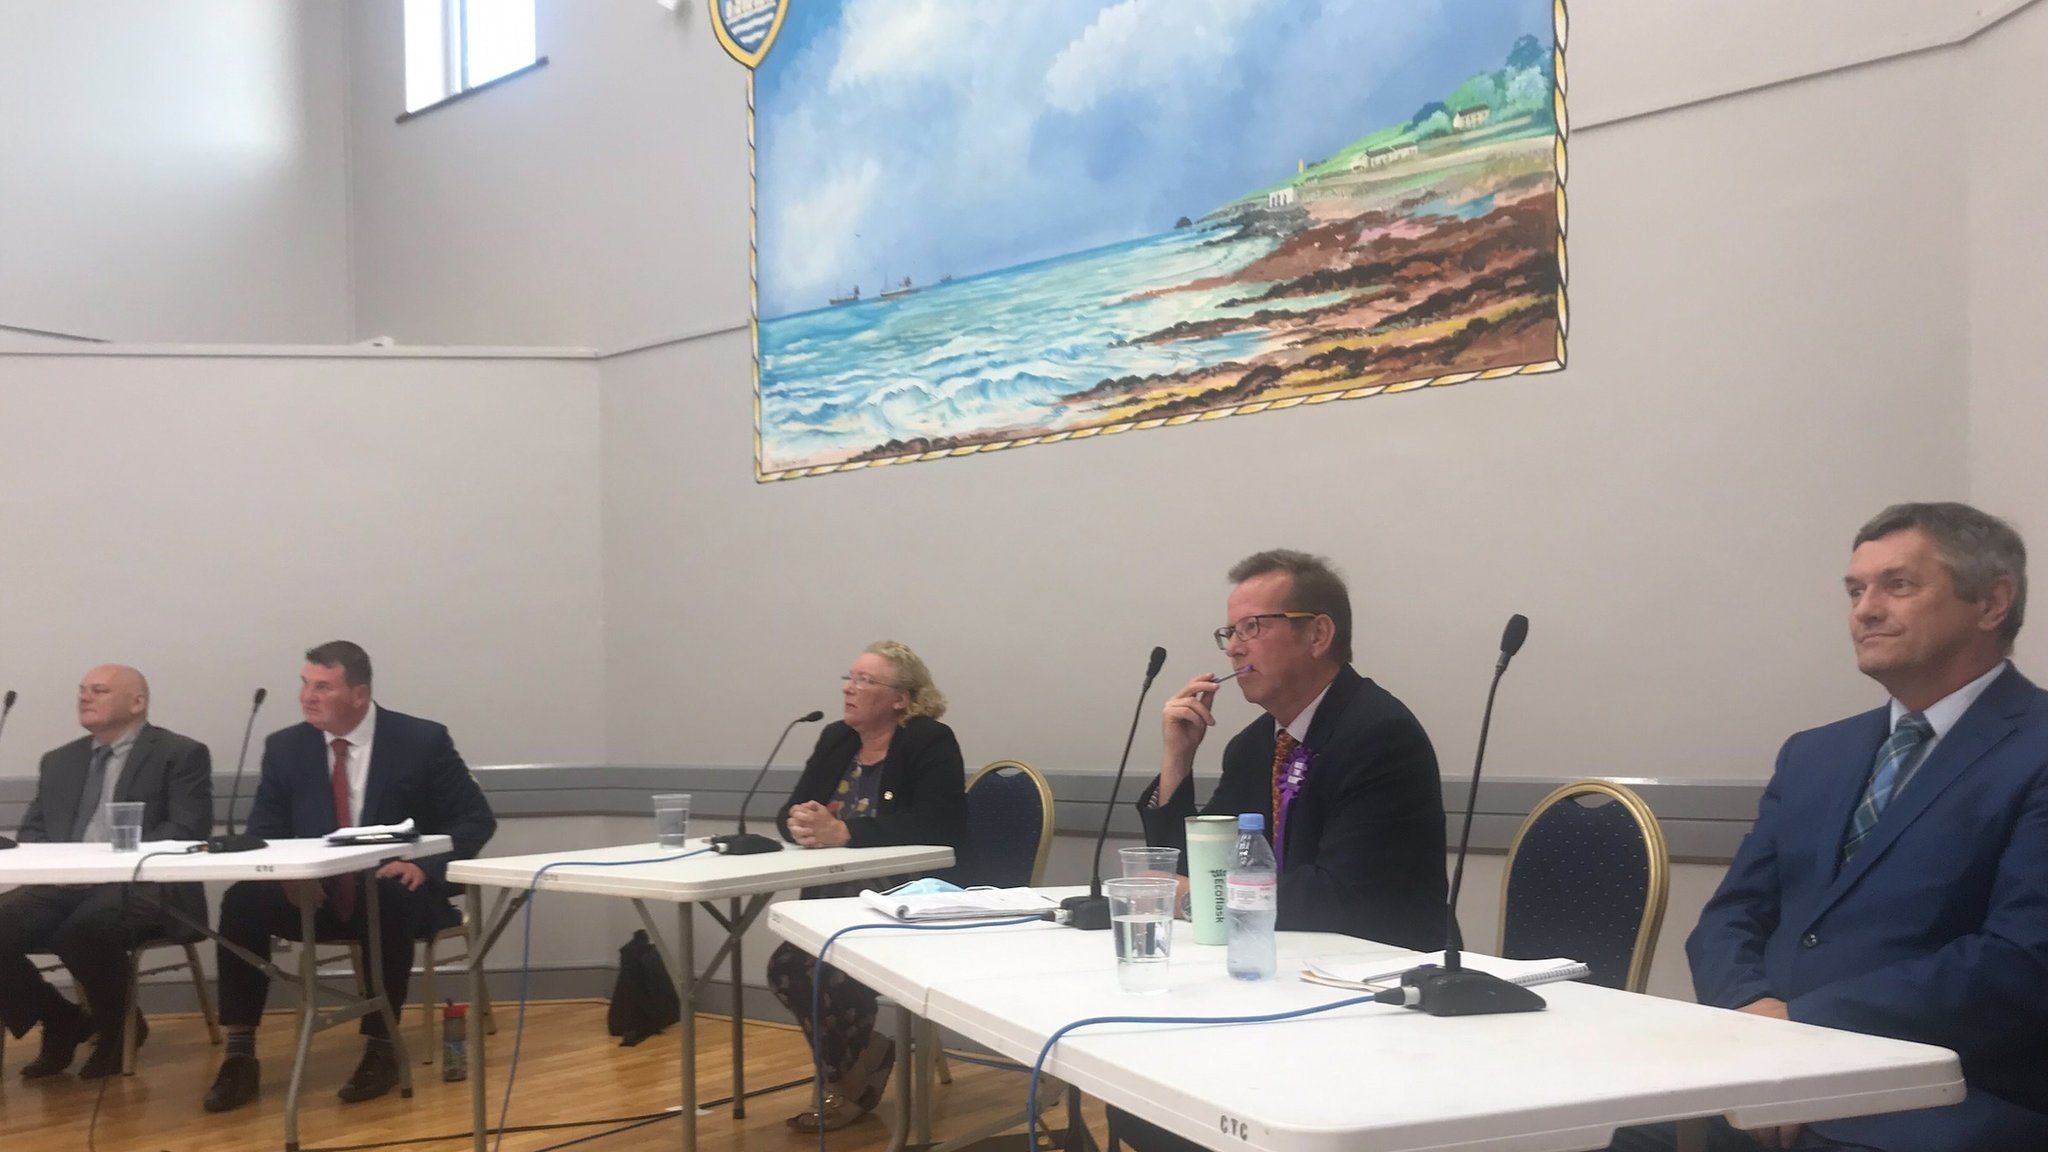 Isle of Man election hustings for Arbory Castletown and Malew 2021